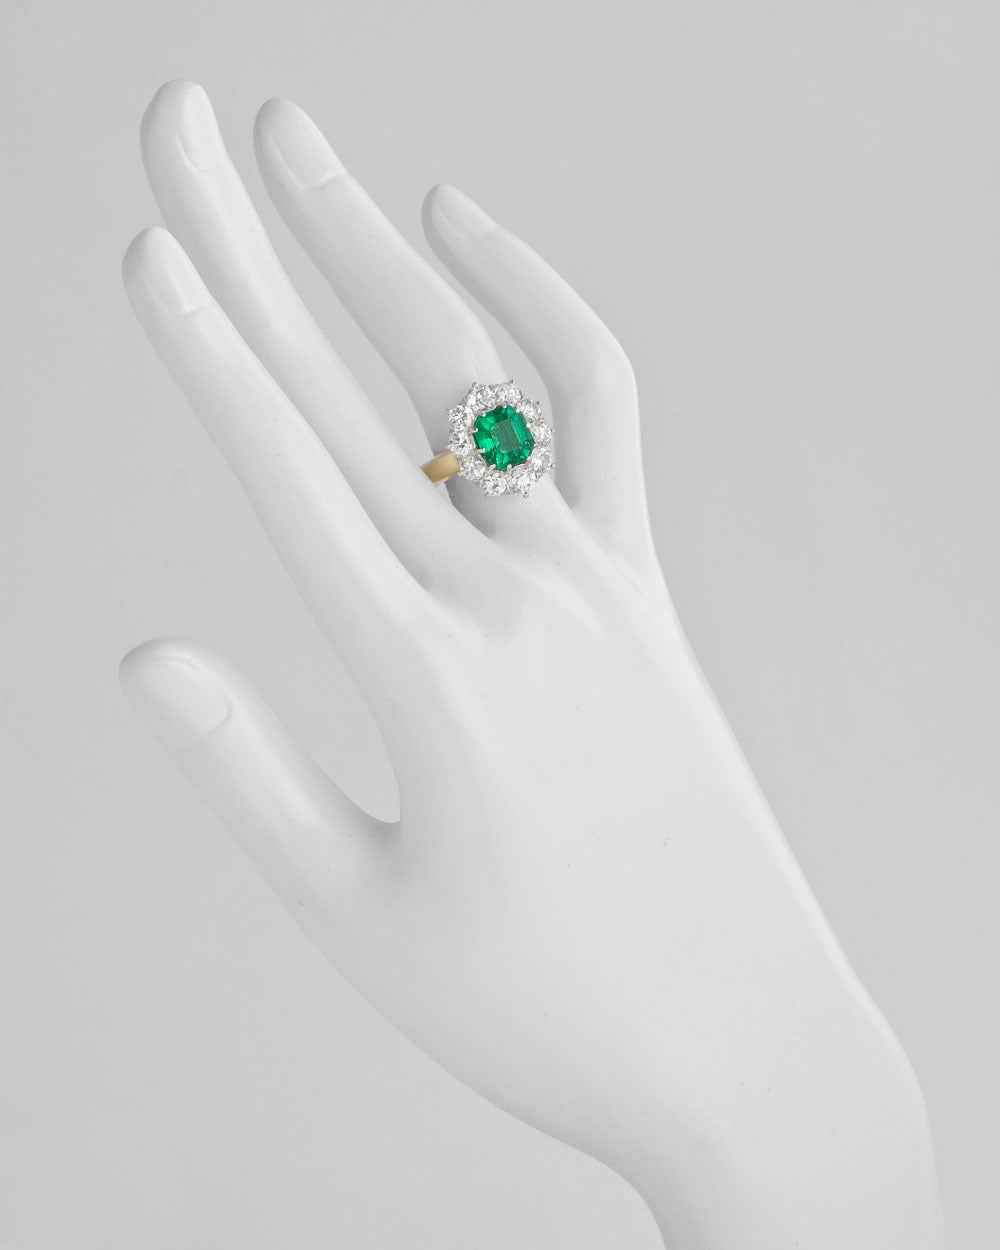 Emerald and diamond cluster ring, centering on an octagonal step-cut emerald weighing 2.86 carats, within a circular-cut diamond surround, the diamonds weighing approximately 1.80 total carats, mounted in 18k yellow gold and platinum. Accompanied by